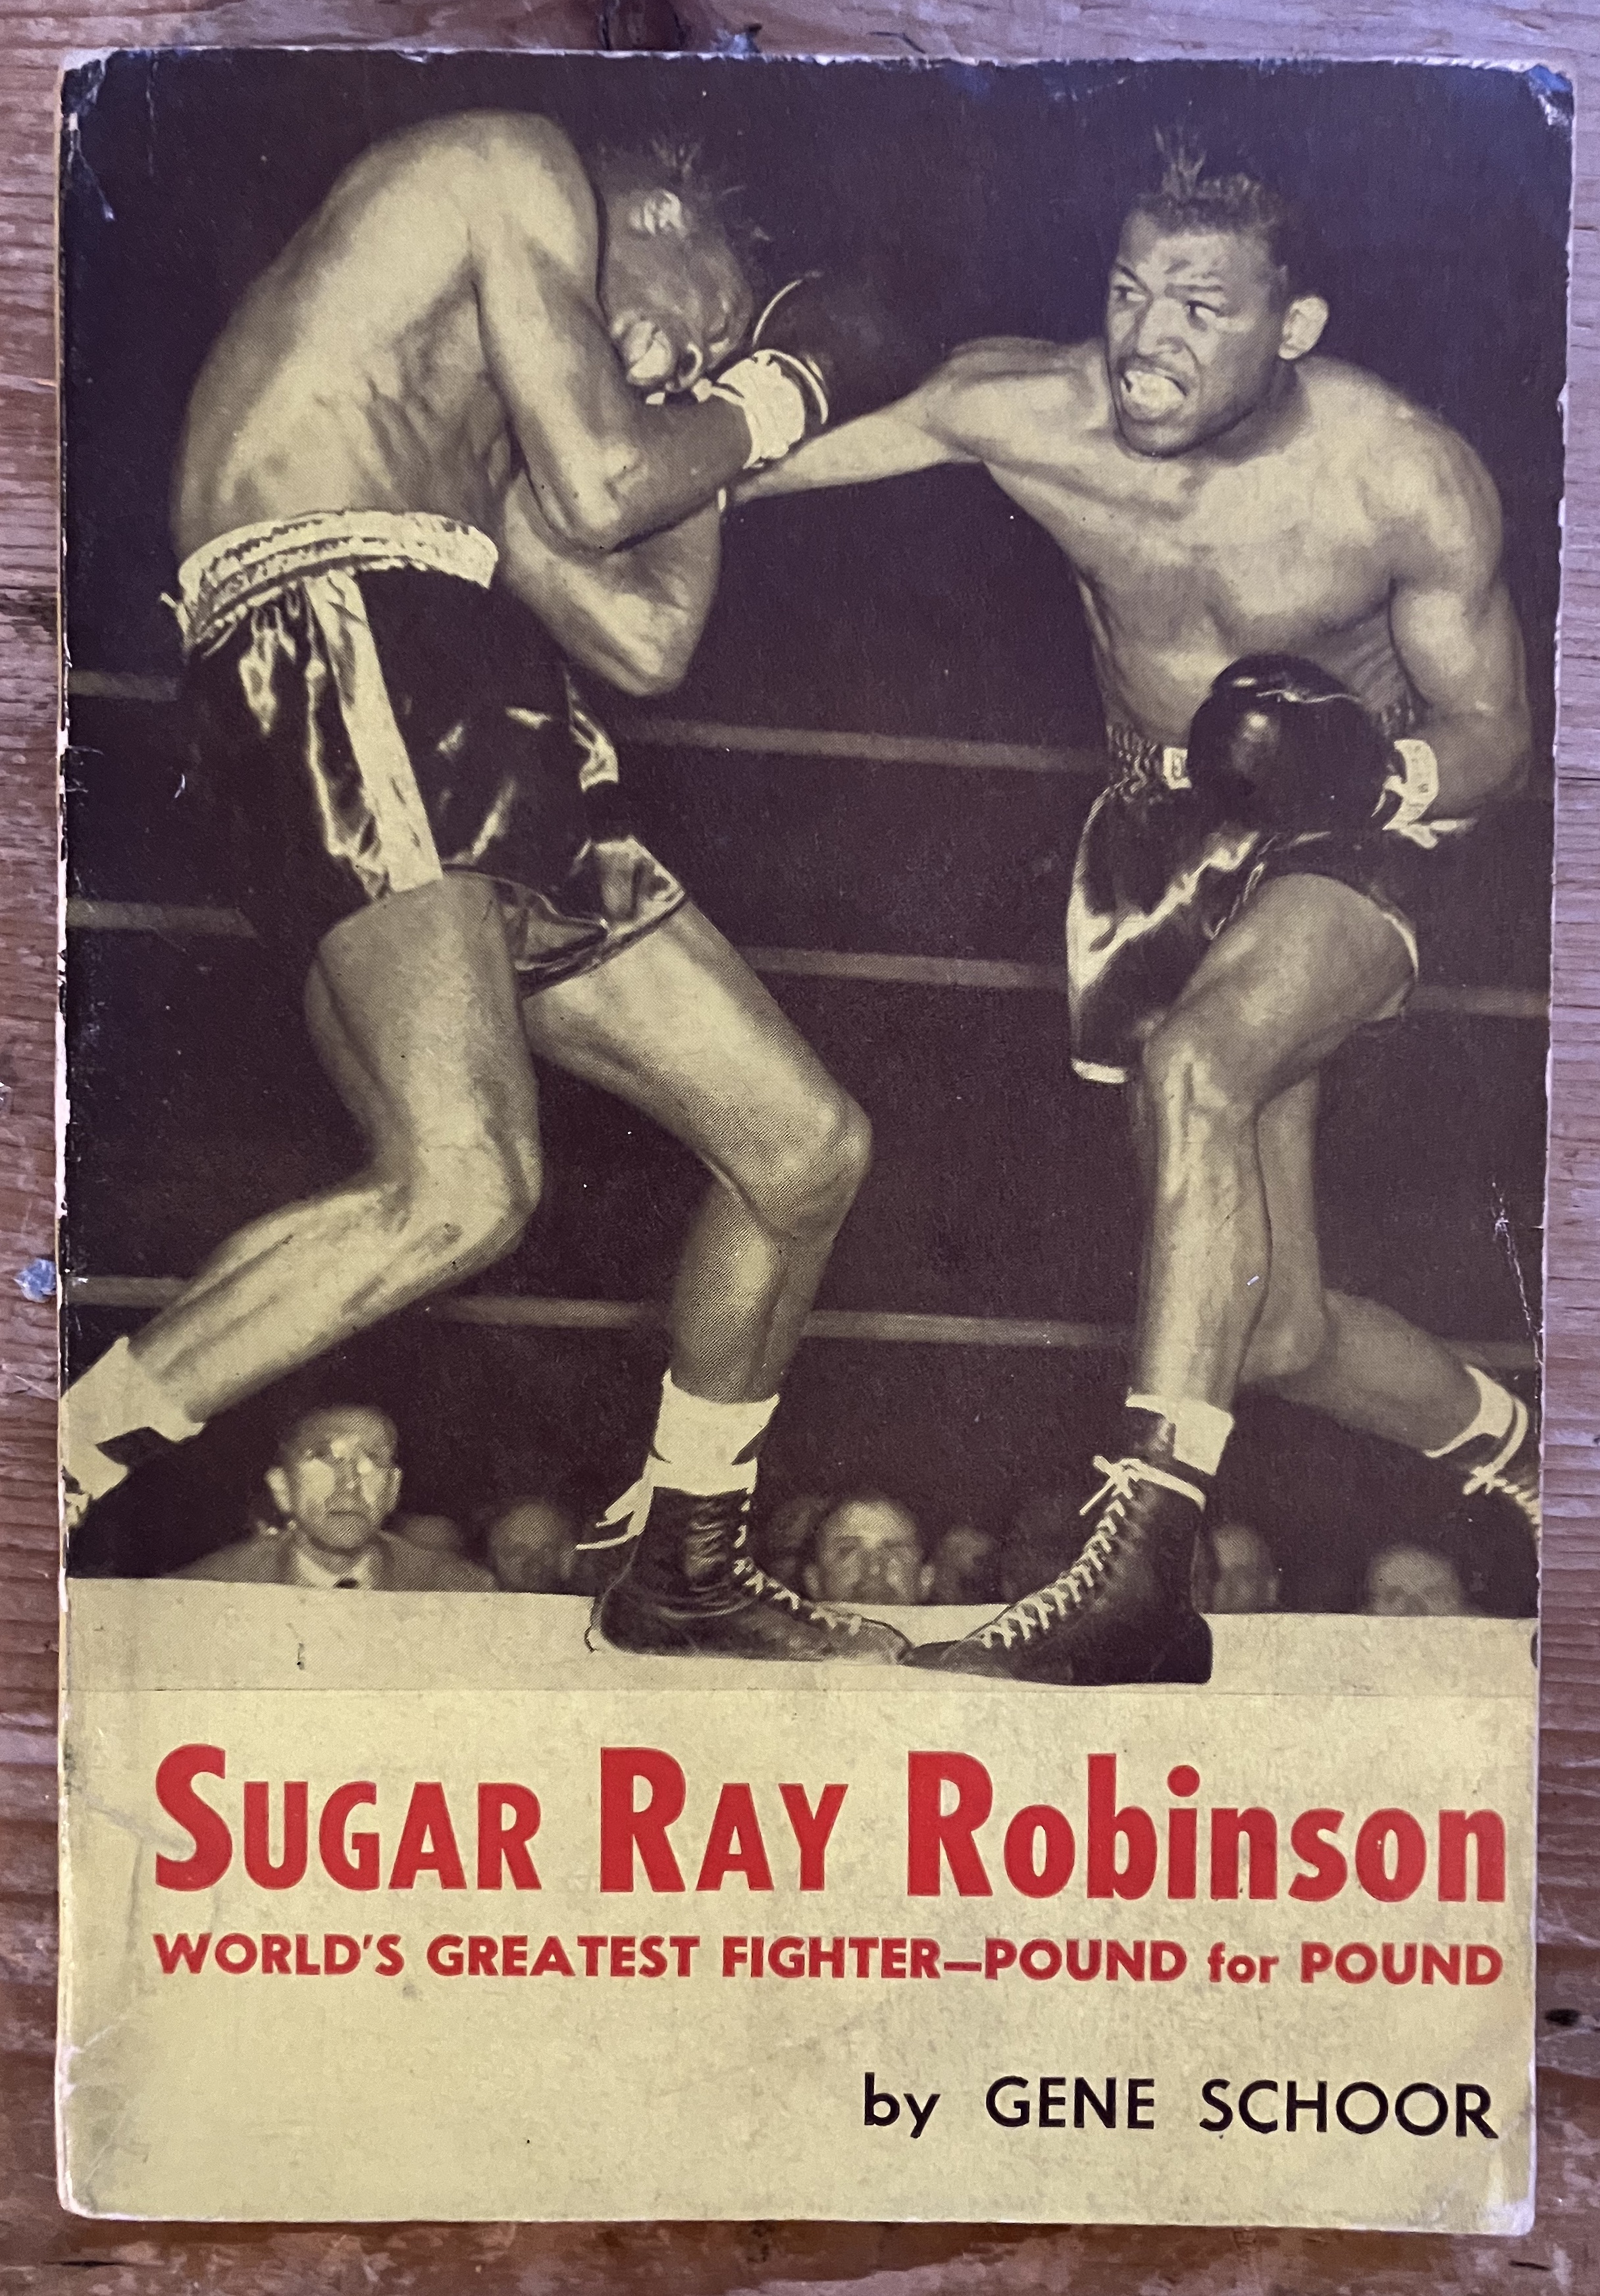 Edition　Pound　Sugar　Soft　1st　Greatest　Ray　(1951)　Schoor,　Gene:　cover　Robinson.　Good　World's　Fighter　Very　by　Pound　for　Pastsport